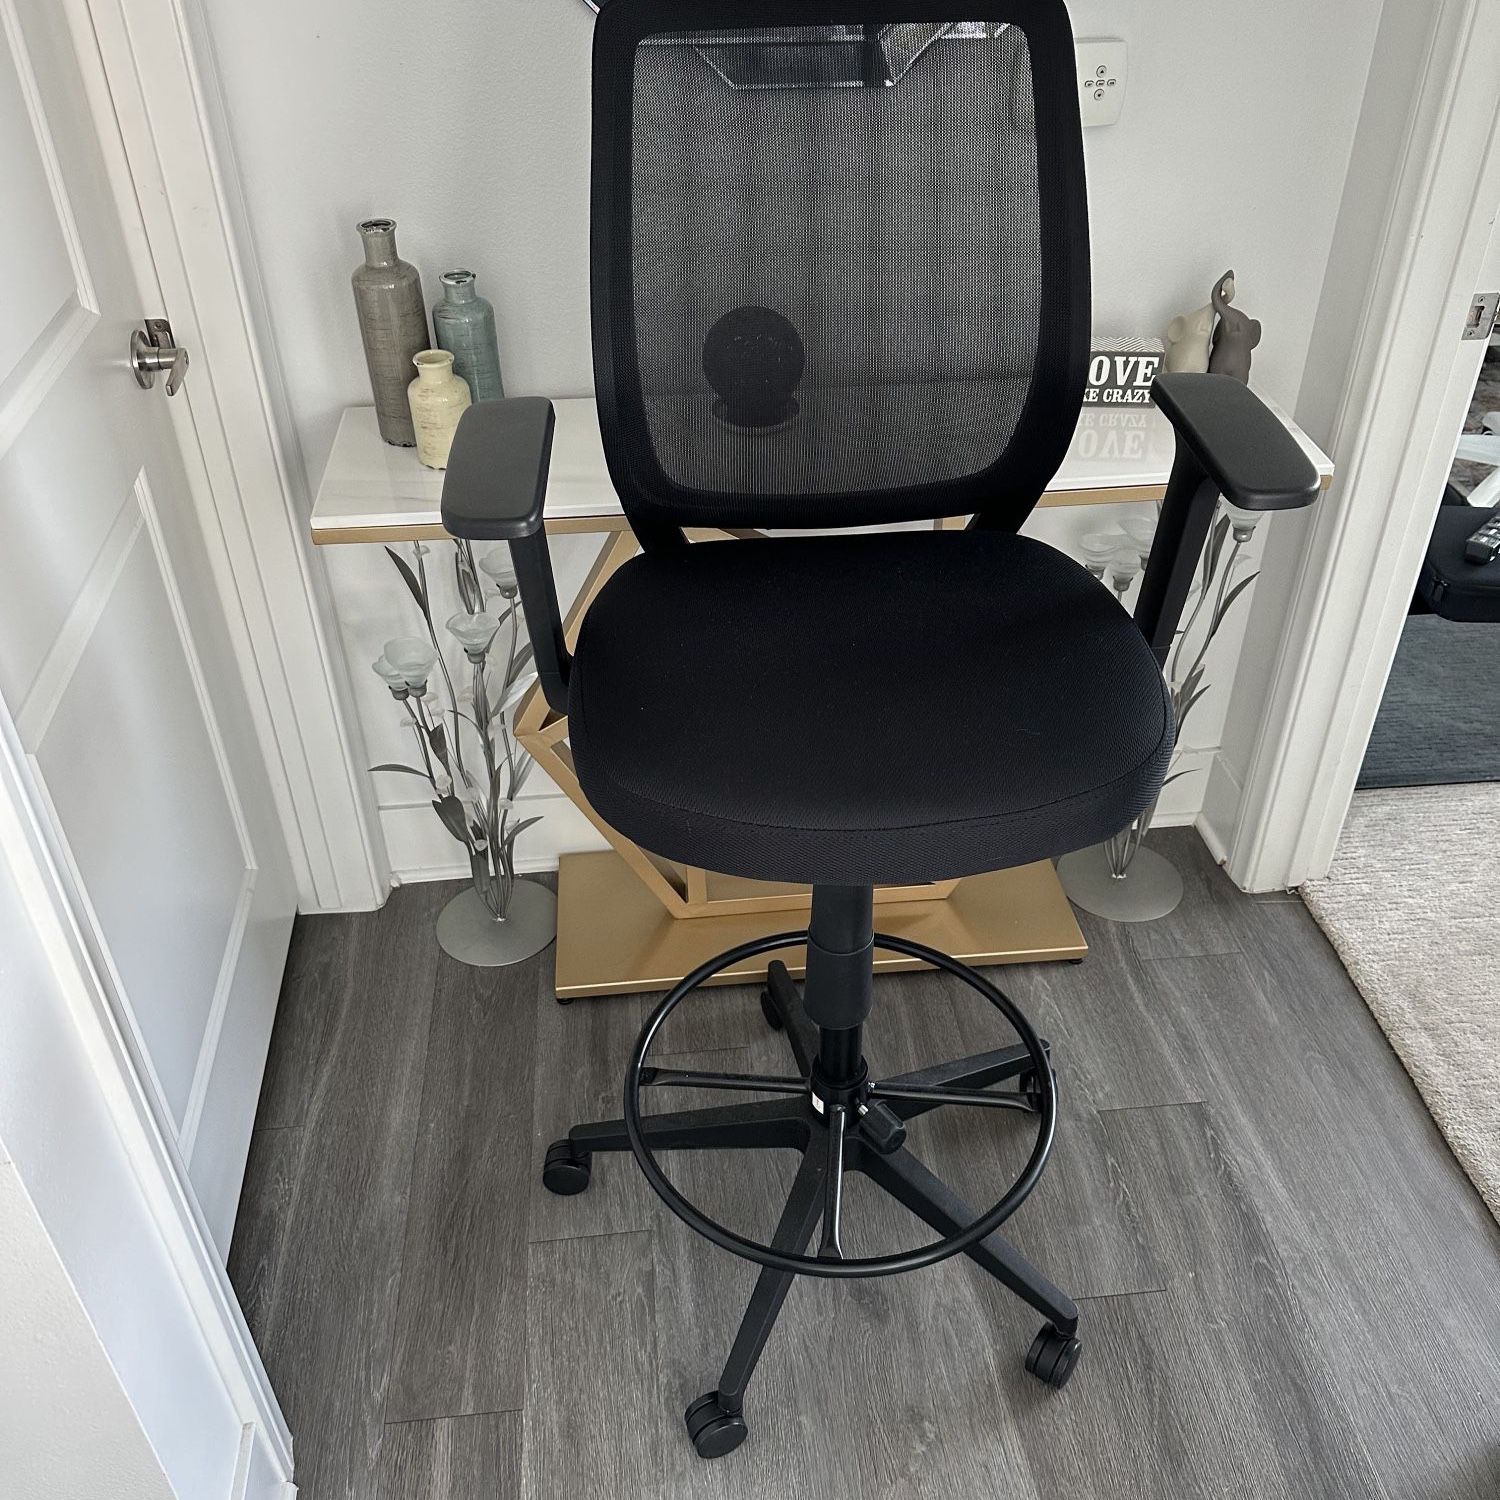 LIKE NEW Black Adjustable Leaning Office Chair With Armrests 